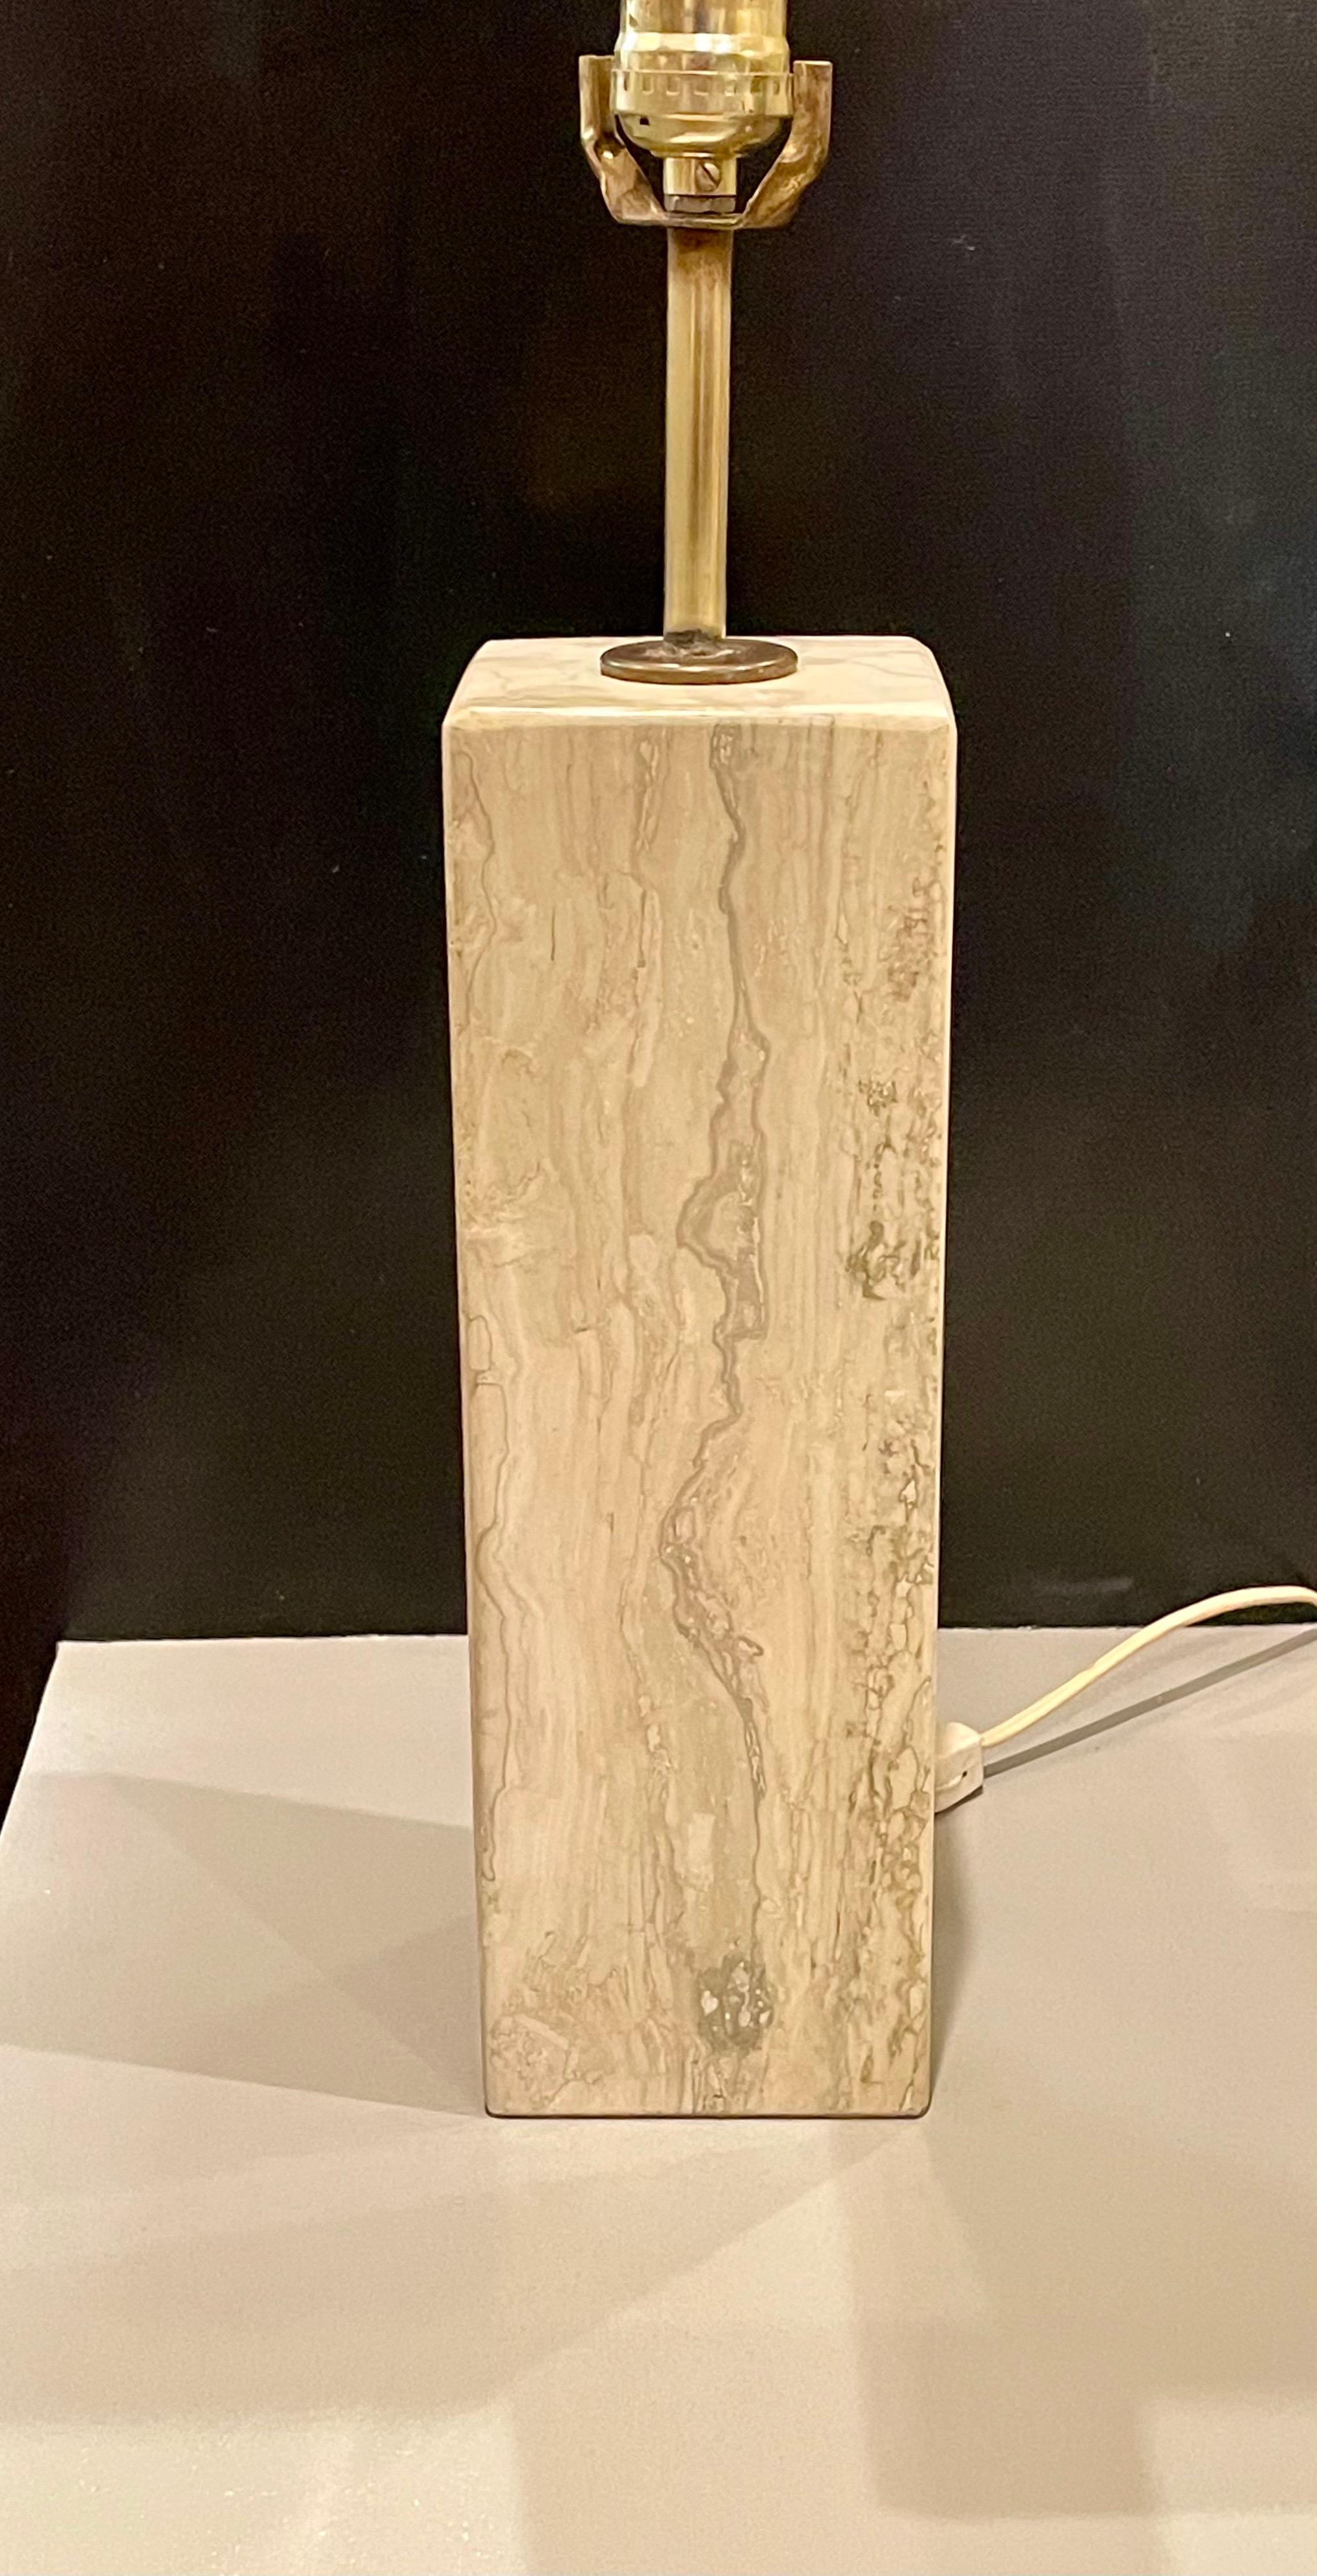 Elegant marble square column Italian marble table lamp, circa the 1980s with brass fittings and perfect working condition, lampshade it's not included, beautiful grain marble with soft edge corners. The lamp is 18